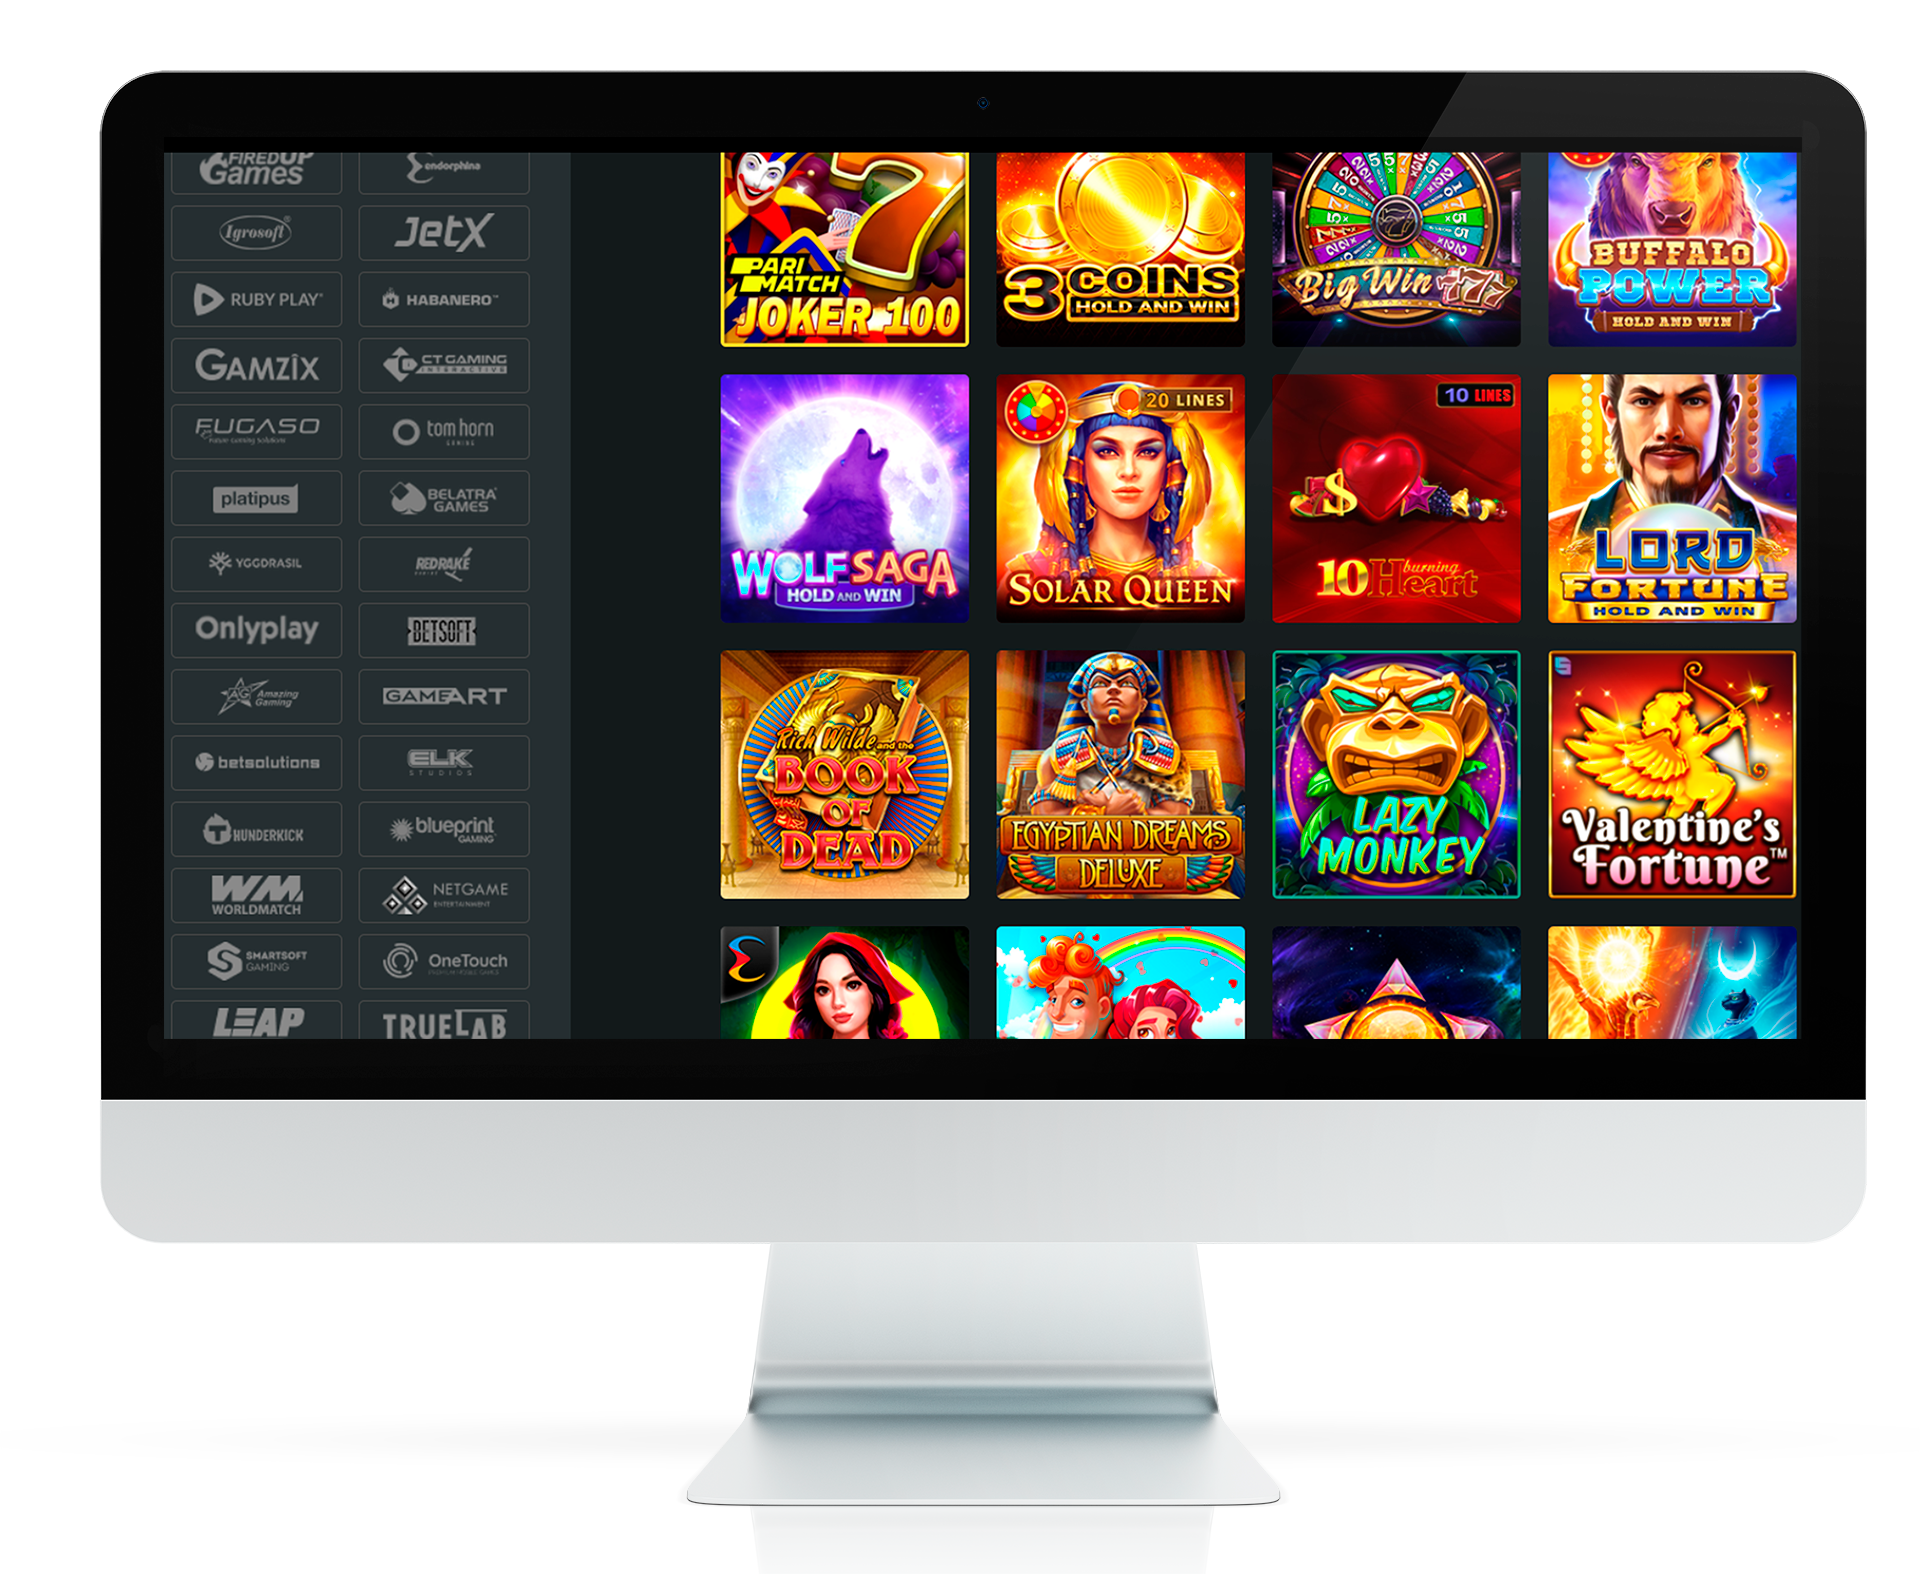 Find your favorite slot and start playing.